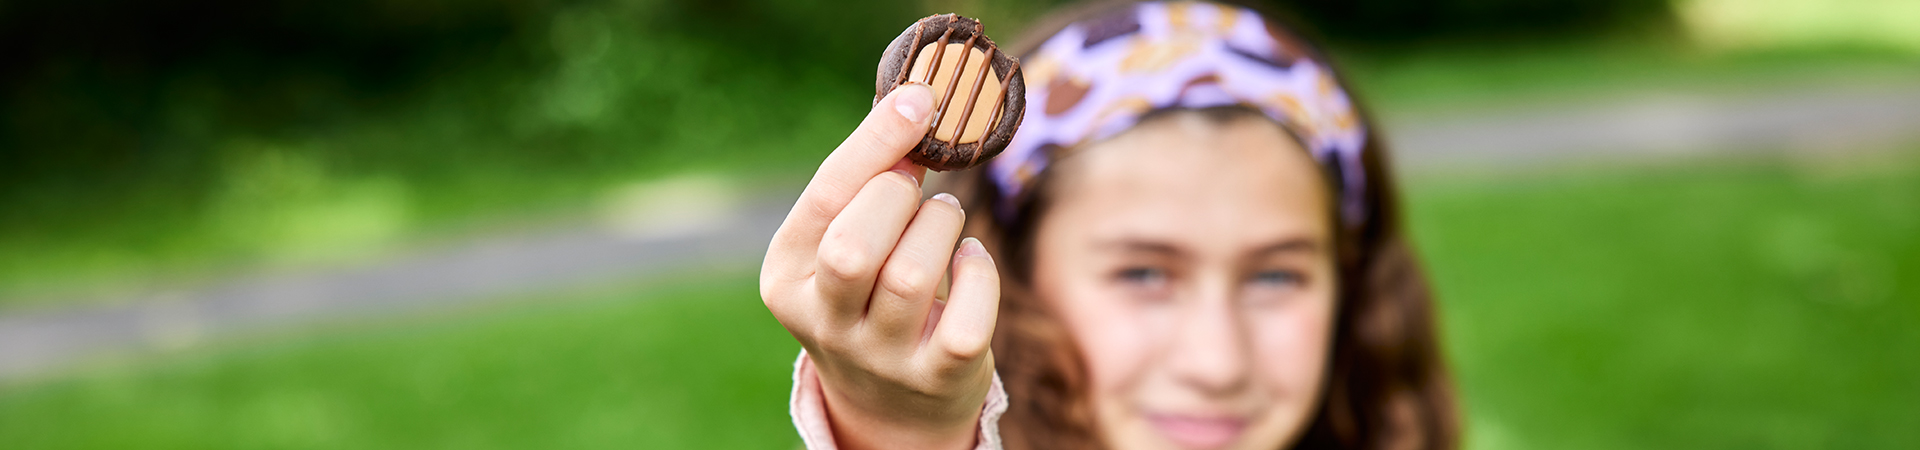  girl scout holds a girl scout cookie 